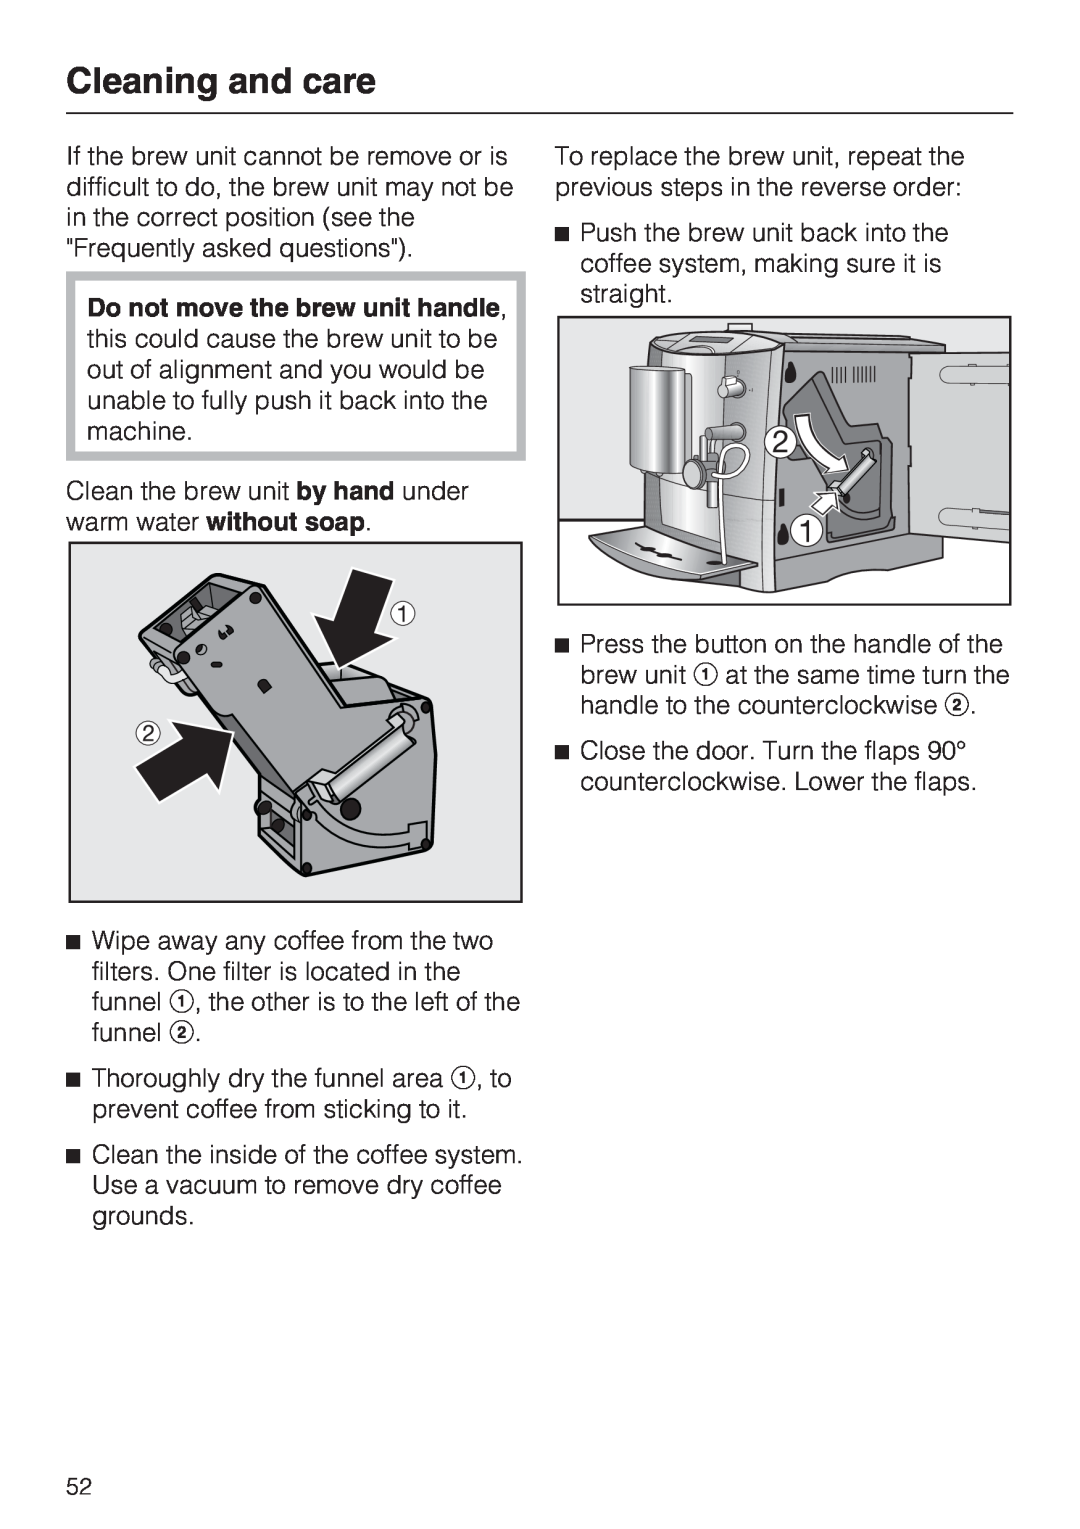 Miele CM 5000 operating instructions Cleaning and care, Do not move the brew unit handle 